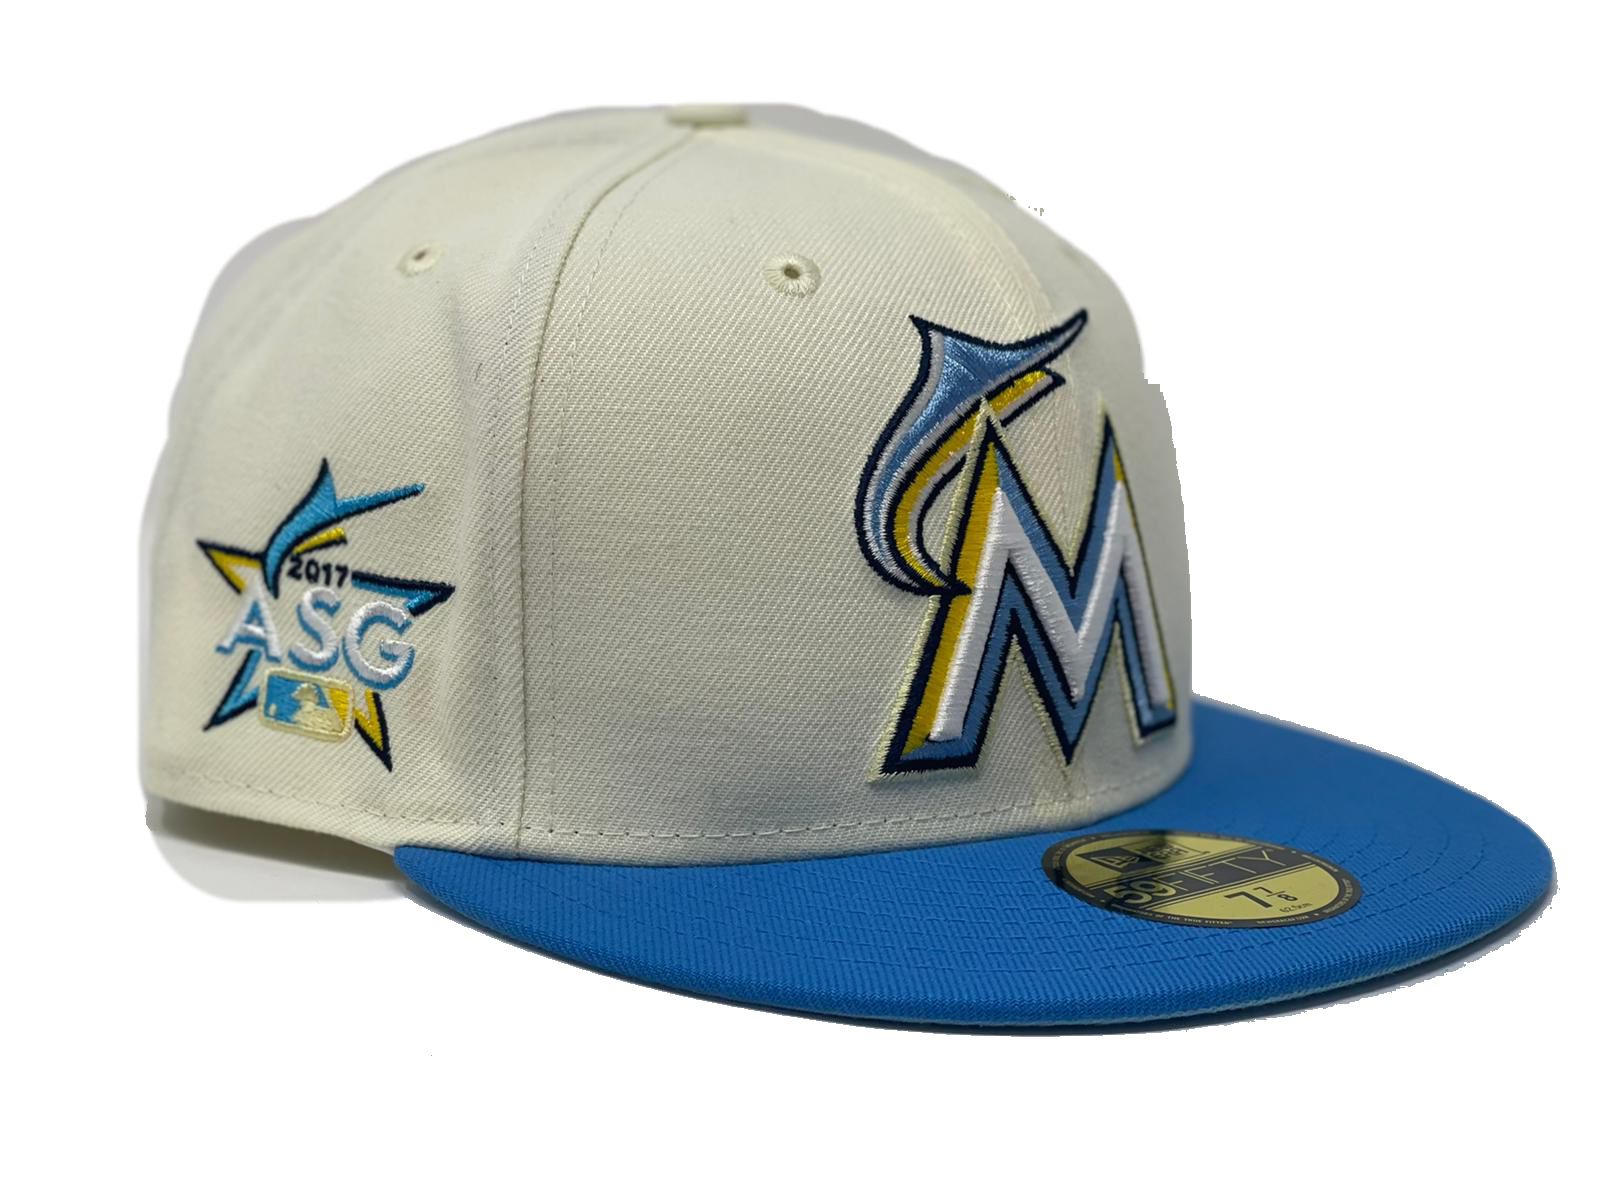 Mlb Miami Marlins hat Blue - $15 (66% Off Retail) - From Caleigh